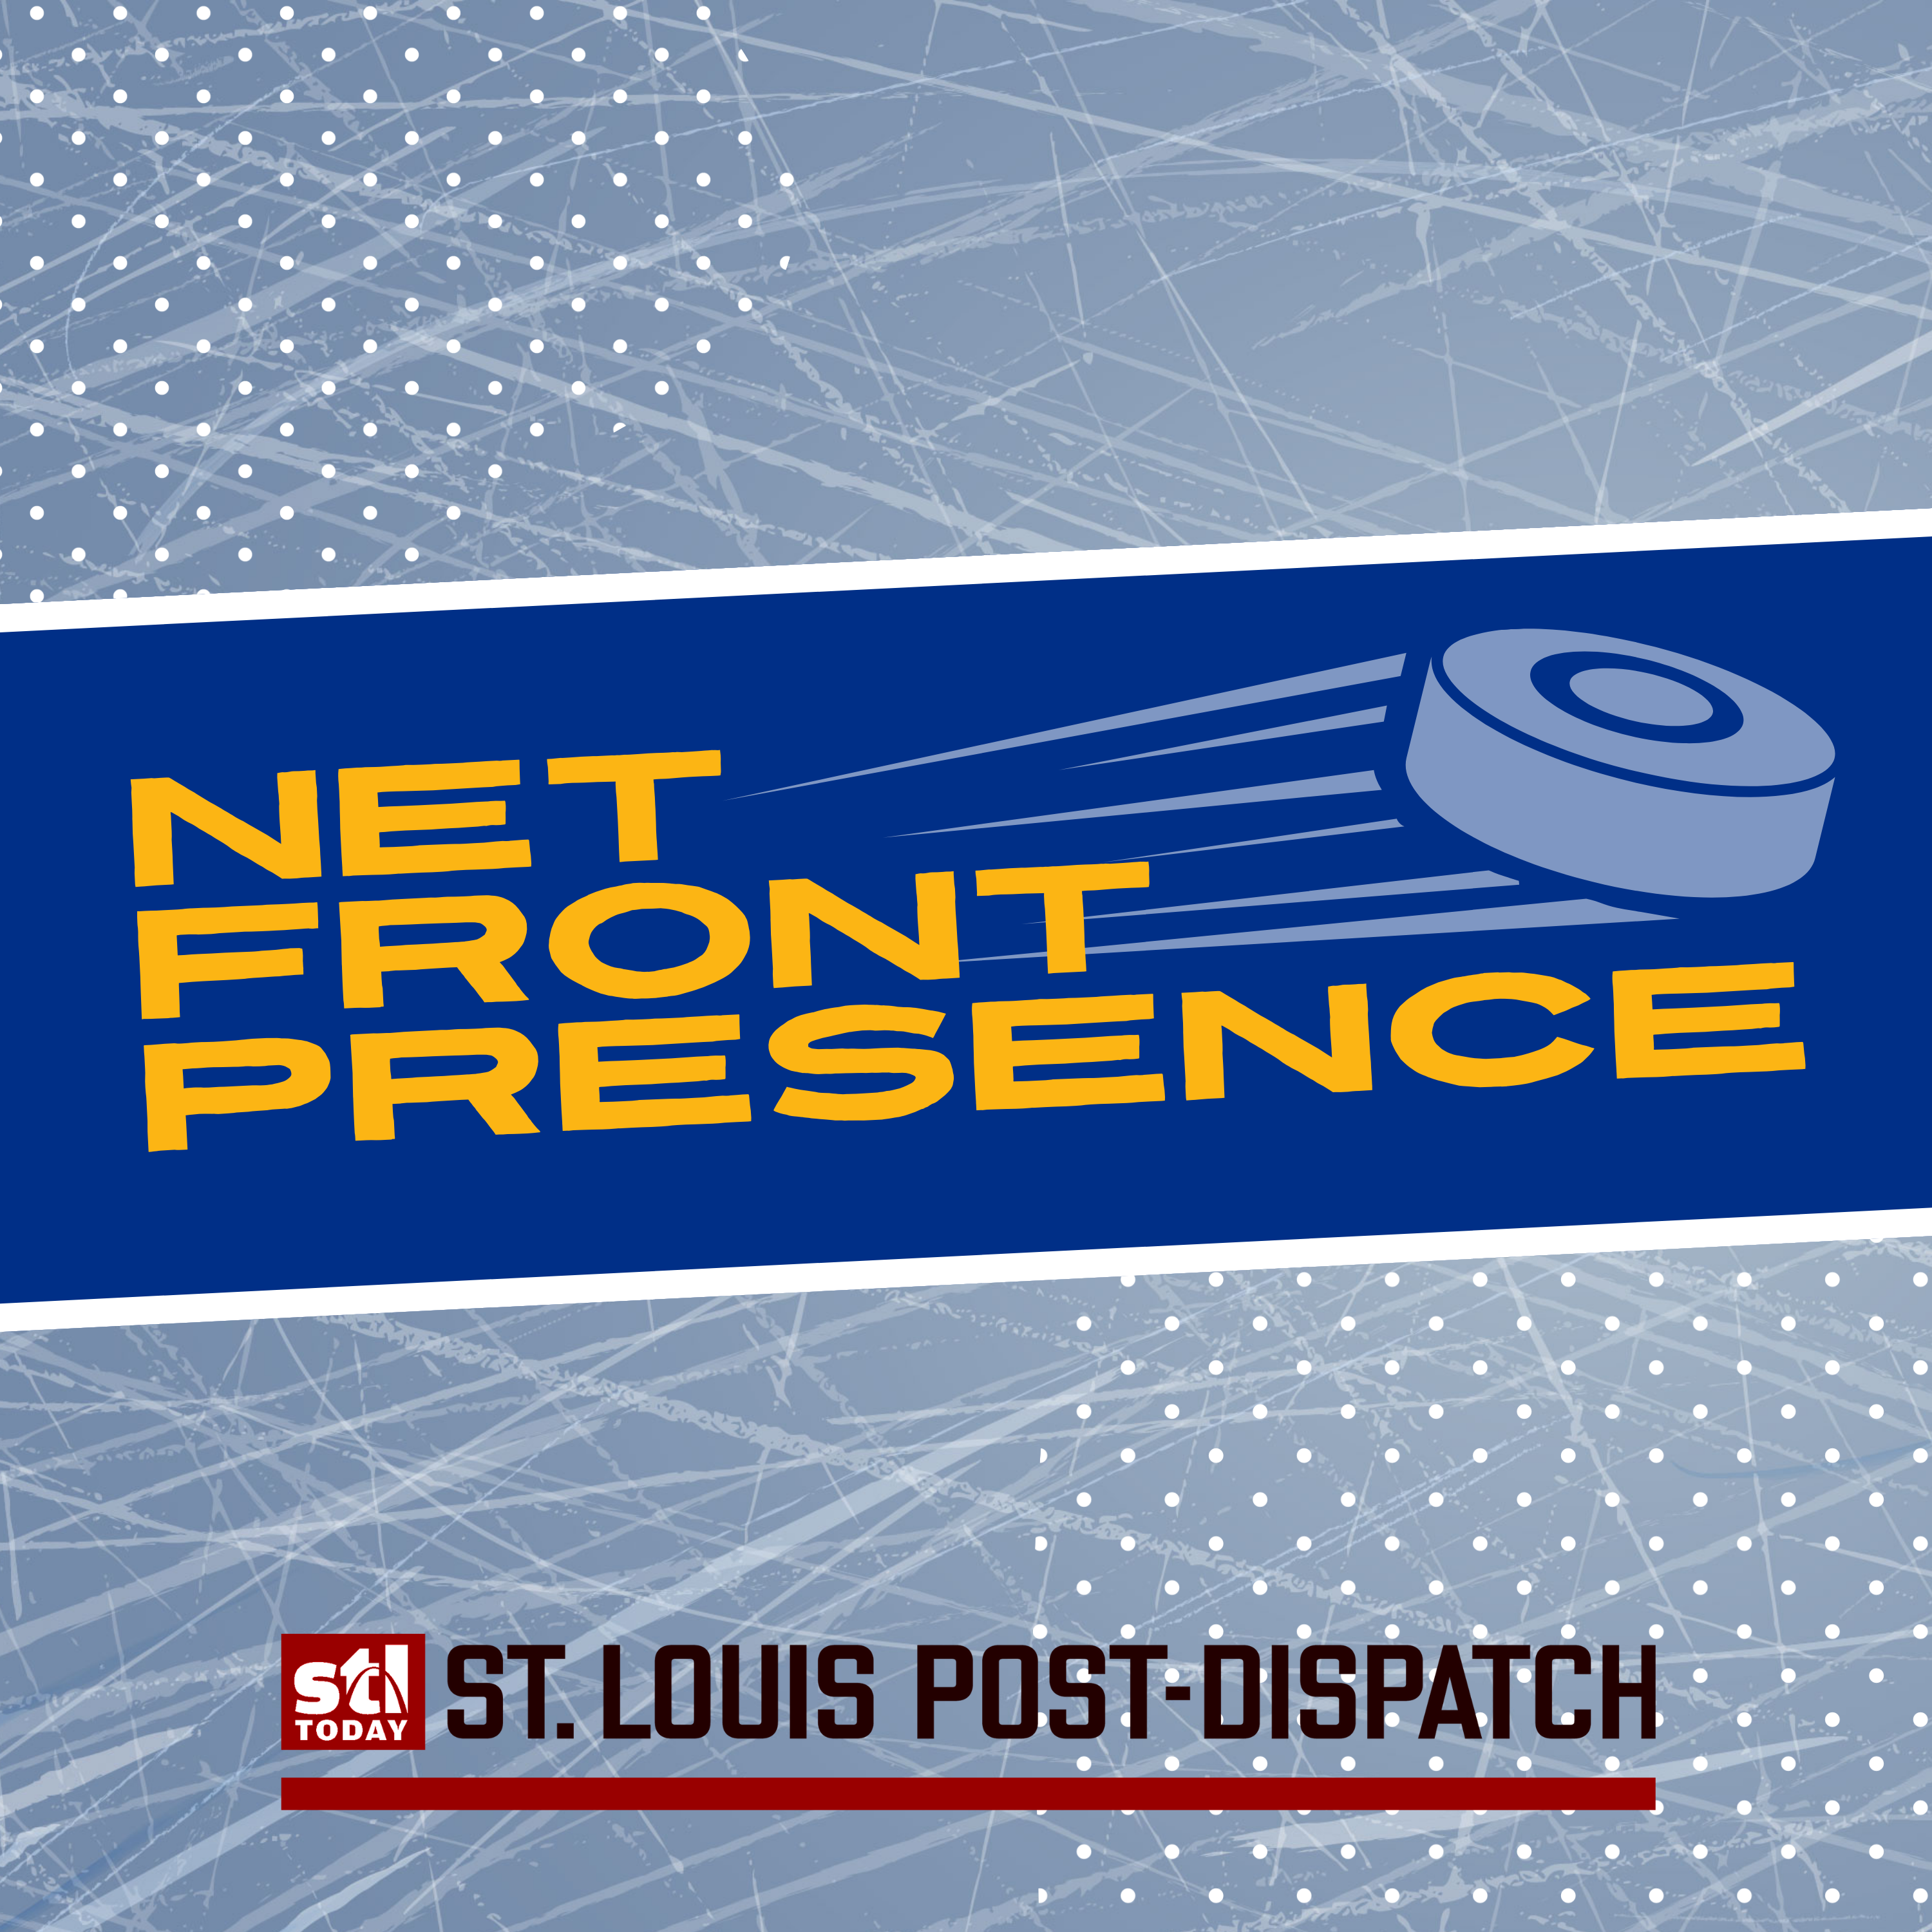 Net Front Presence: Blues lose Perron, promote Brown, win consecutive games